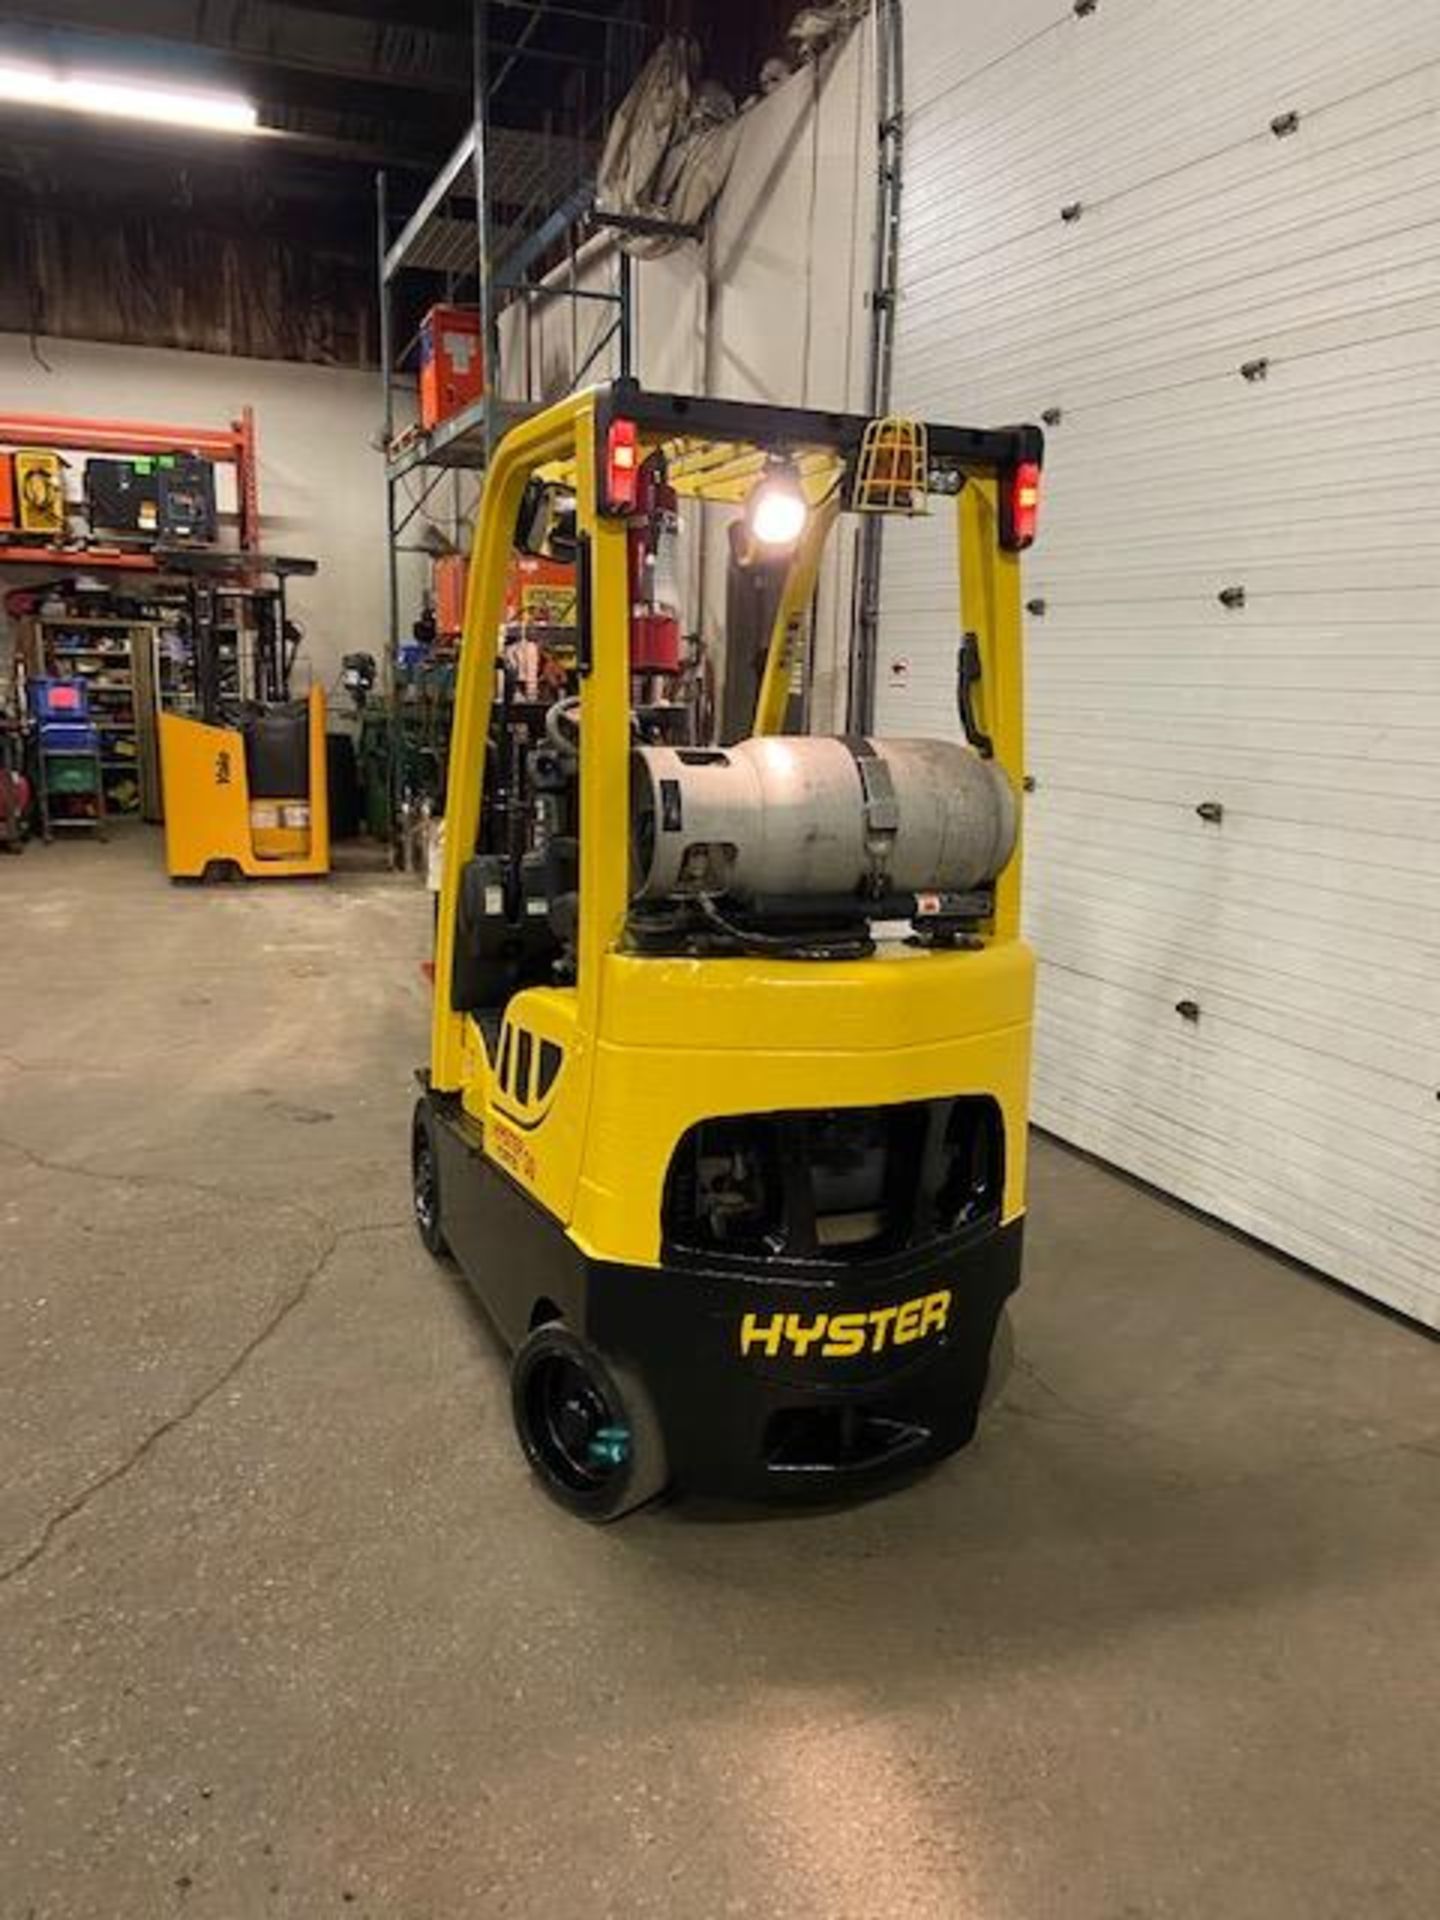 FREE CUSTOMS - 2015 Hyster 3000lbs Capacity Forklift LPG (propane) with sideshift LOW HOURS (no - Image 3 of 3